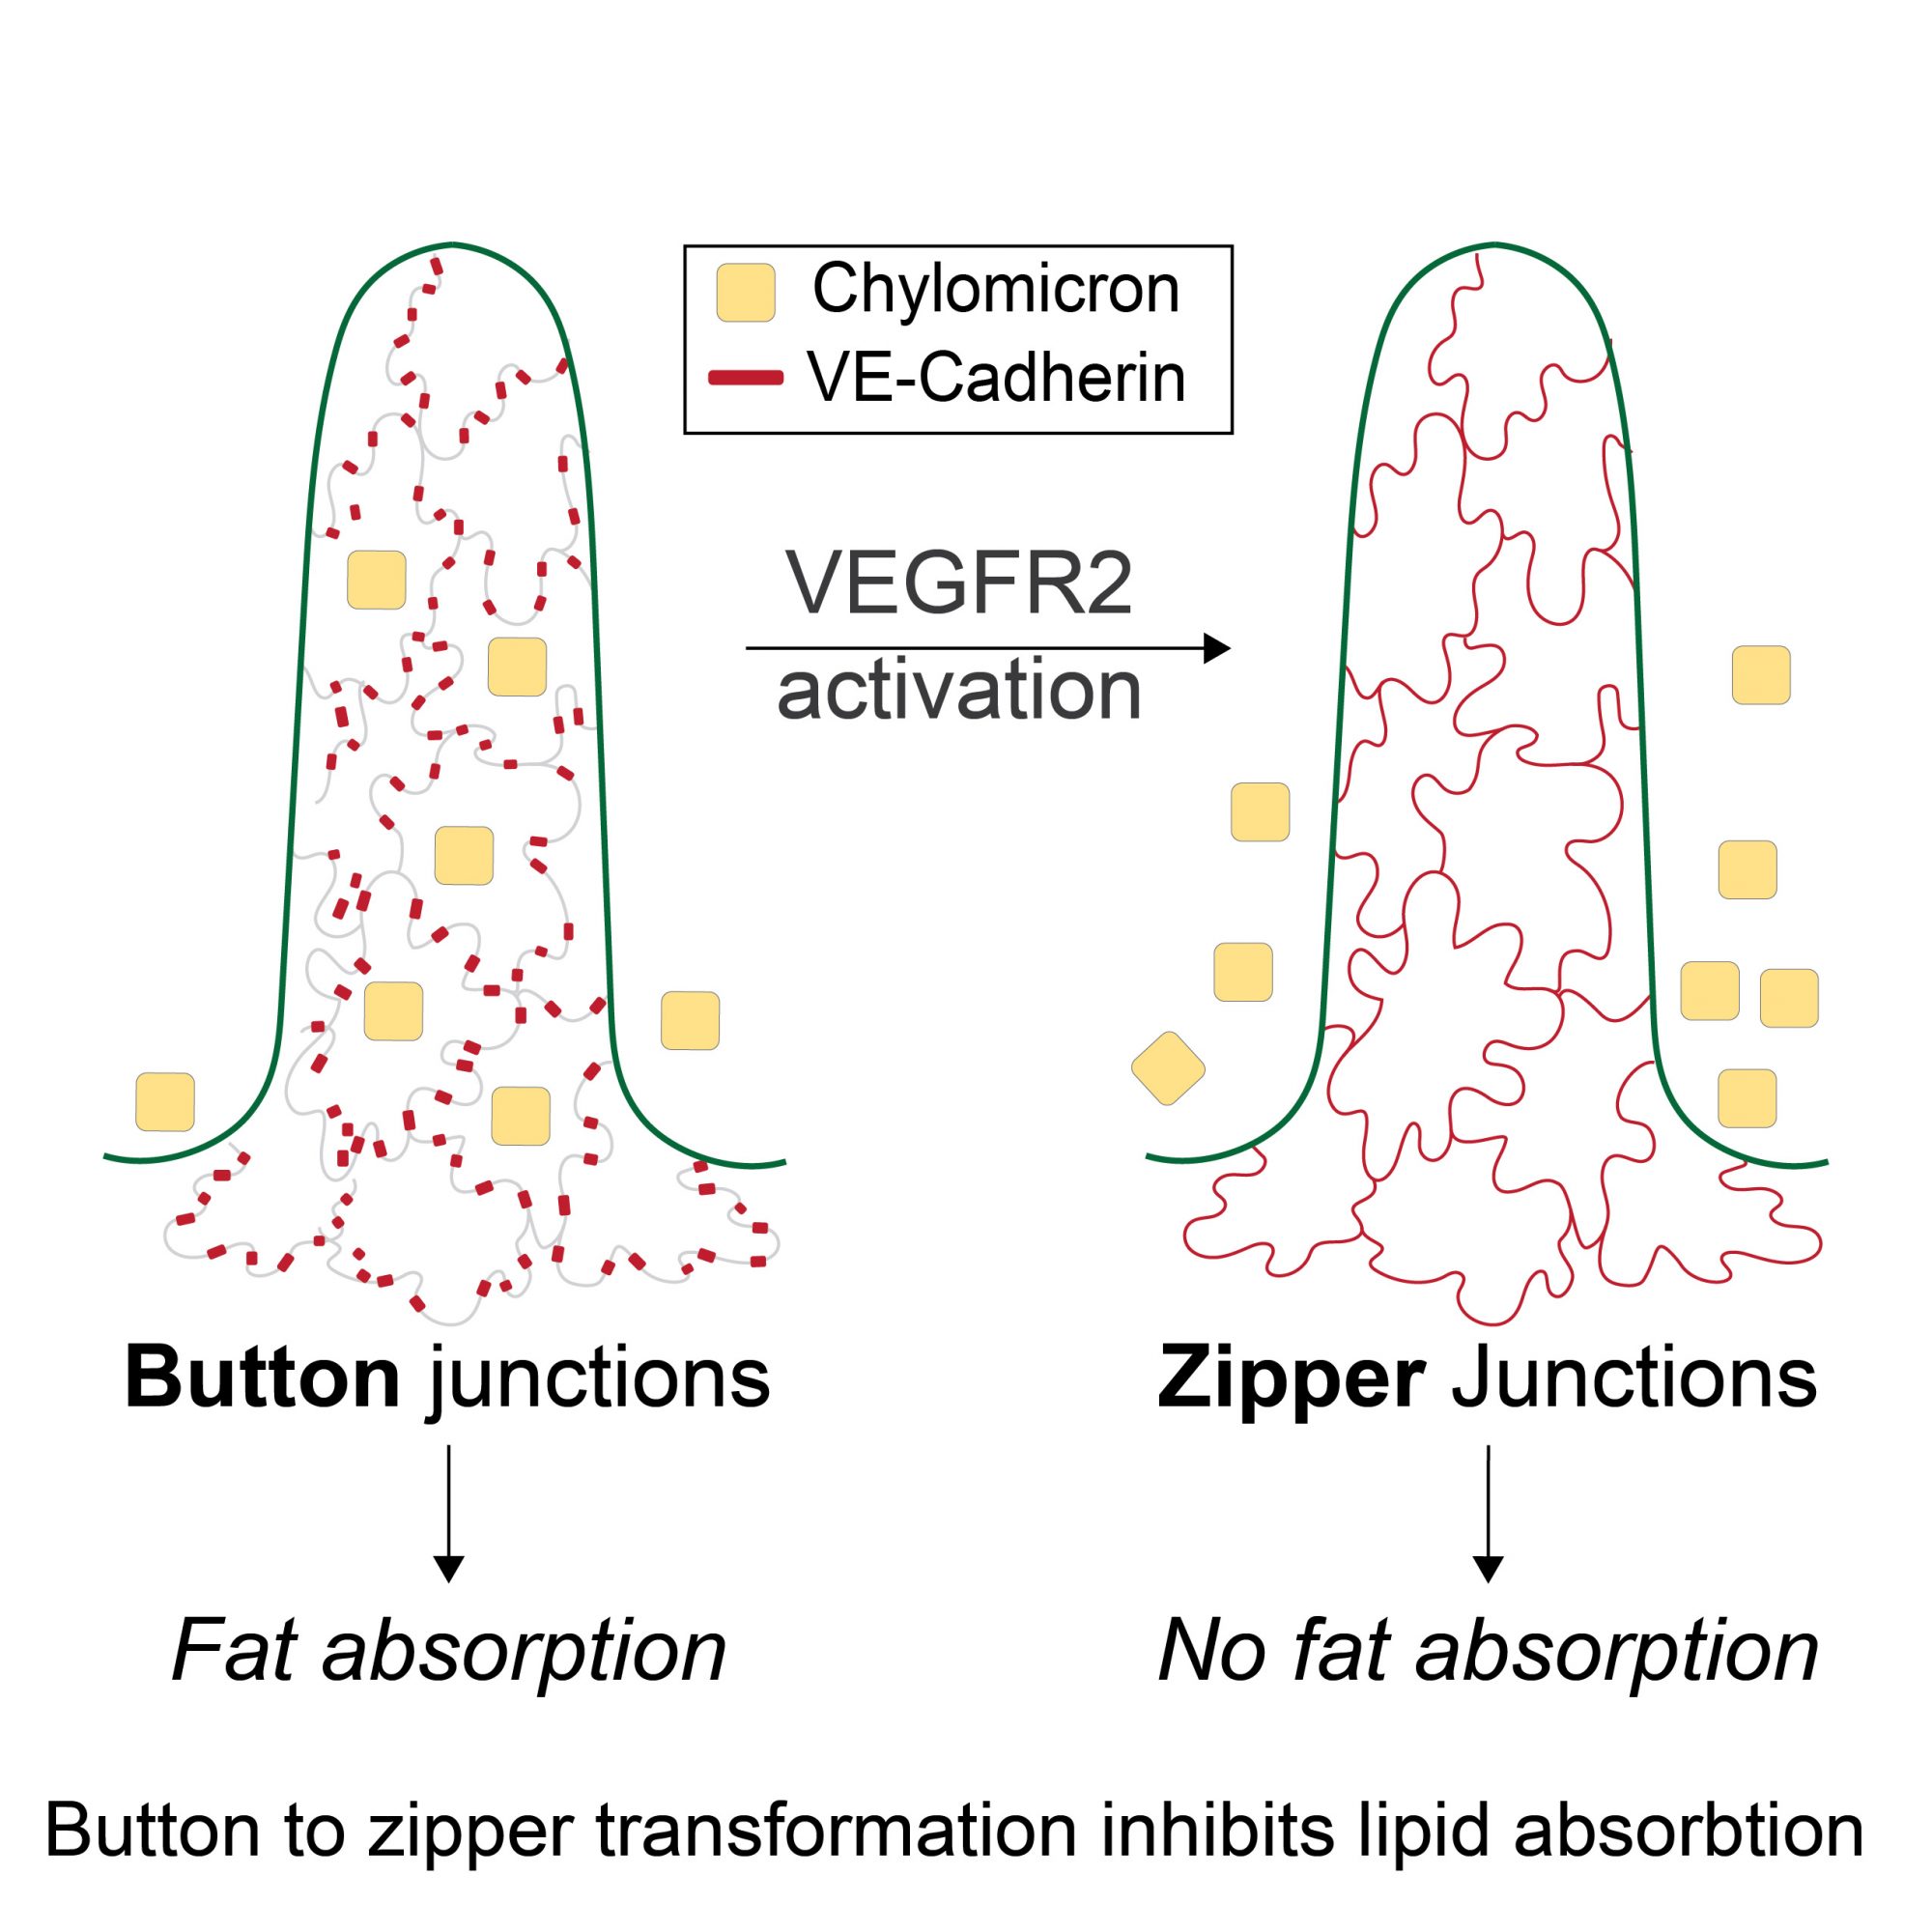 Effects of button to zipper transformation in lacteals